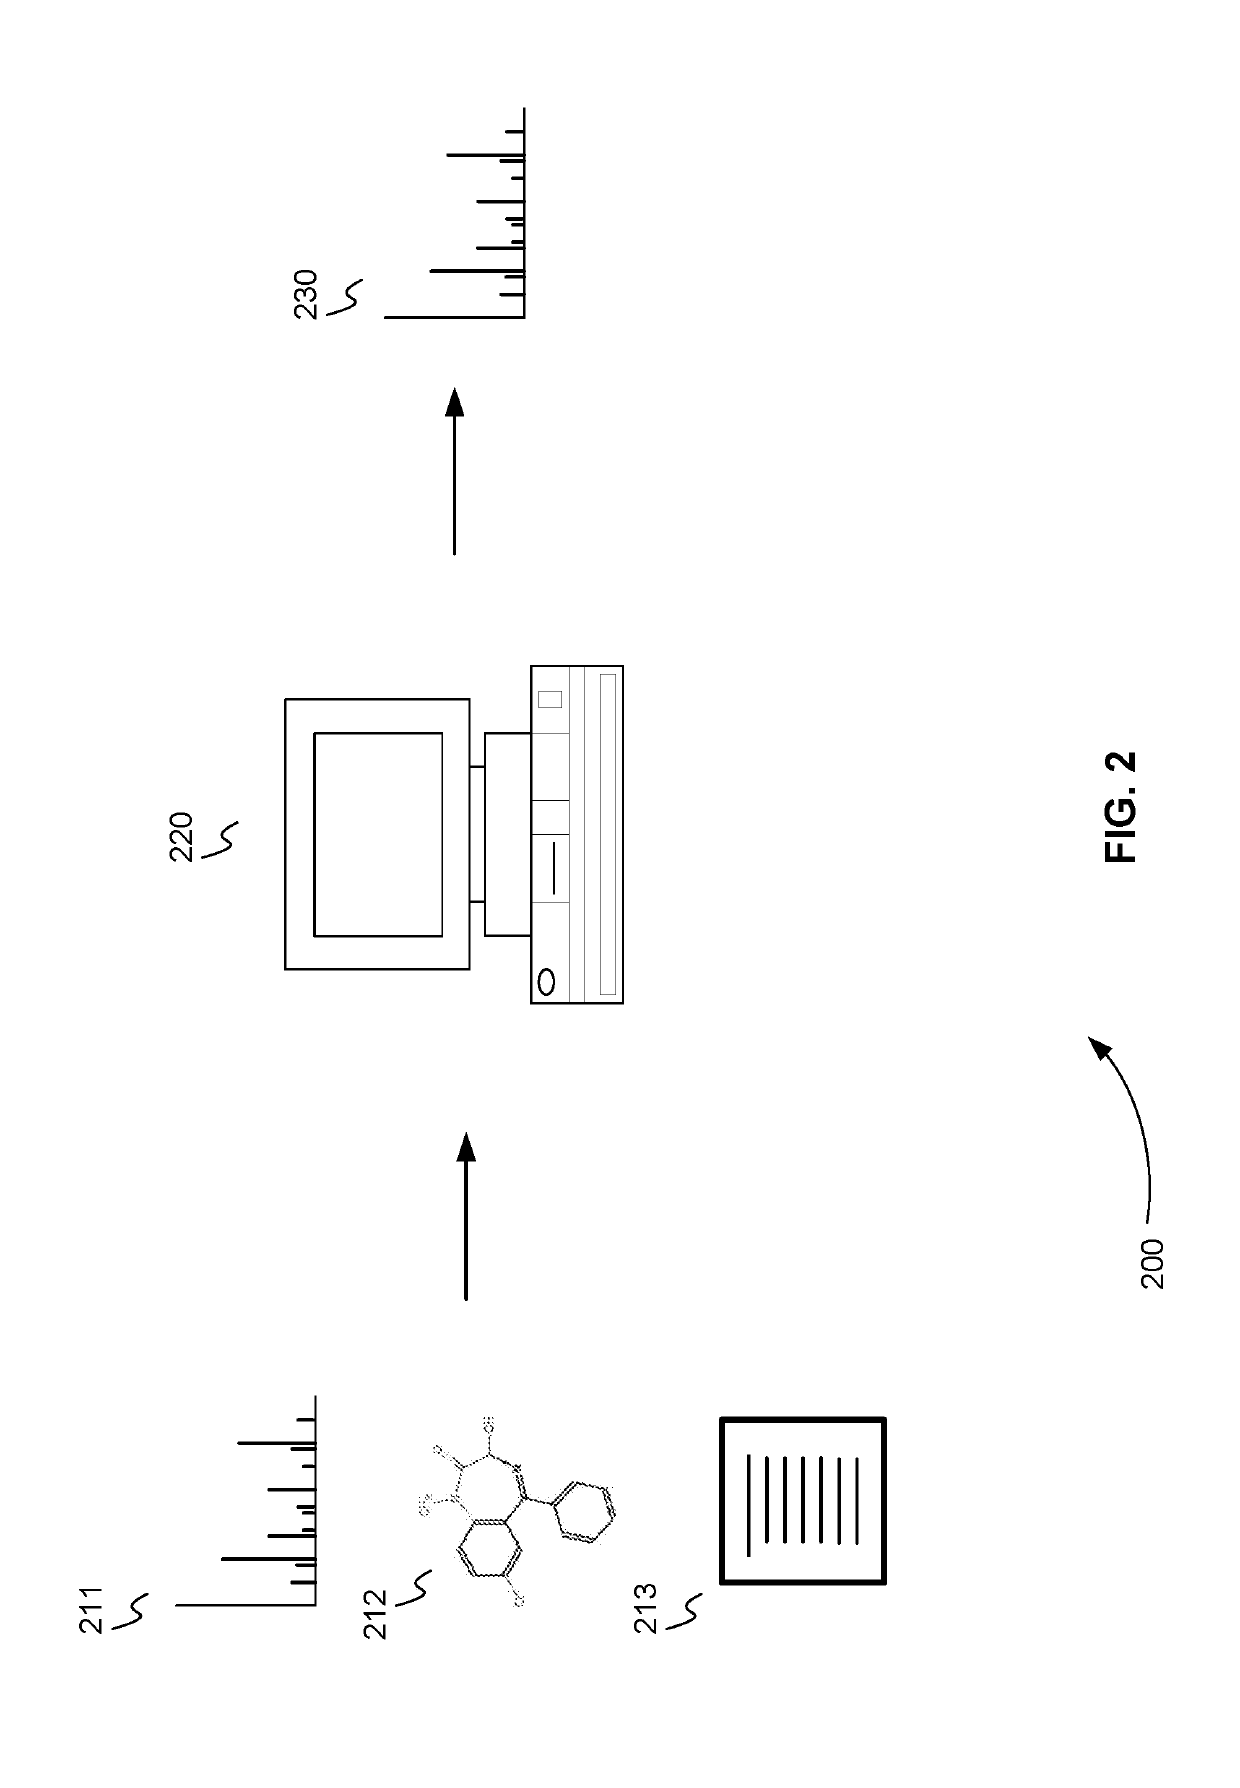 Method for converting mass spectral libraries into accurate mass spectral libraries